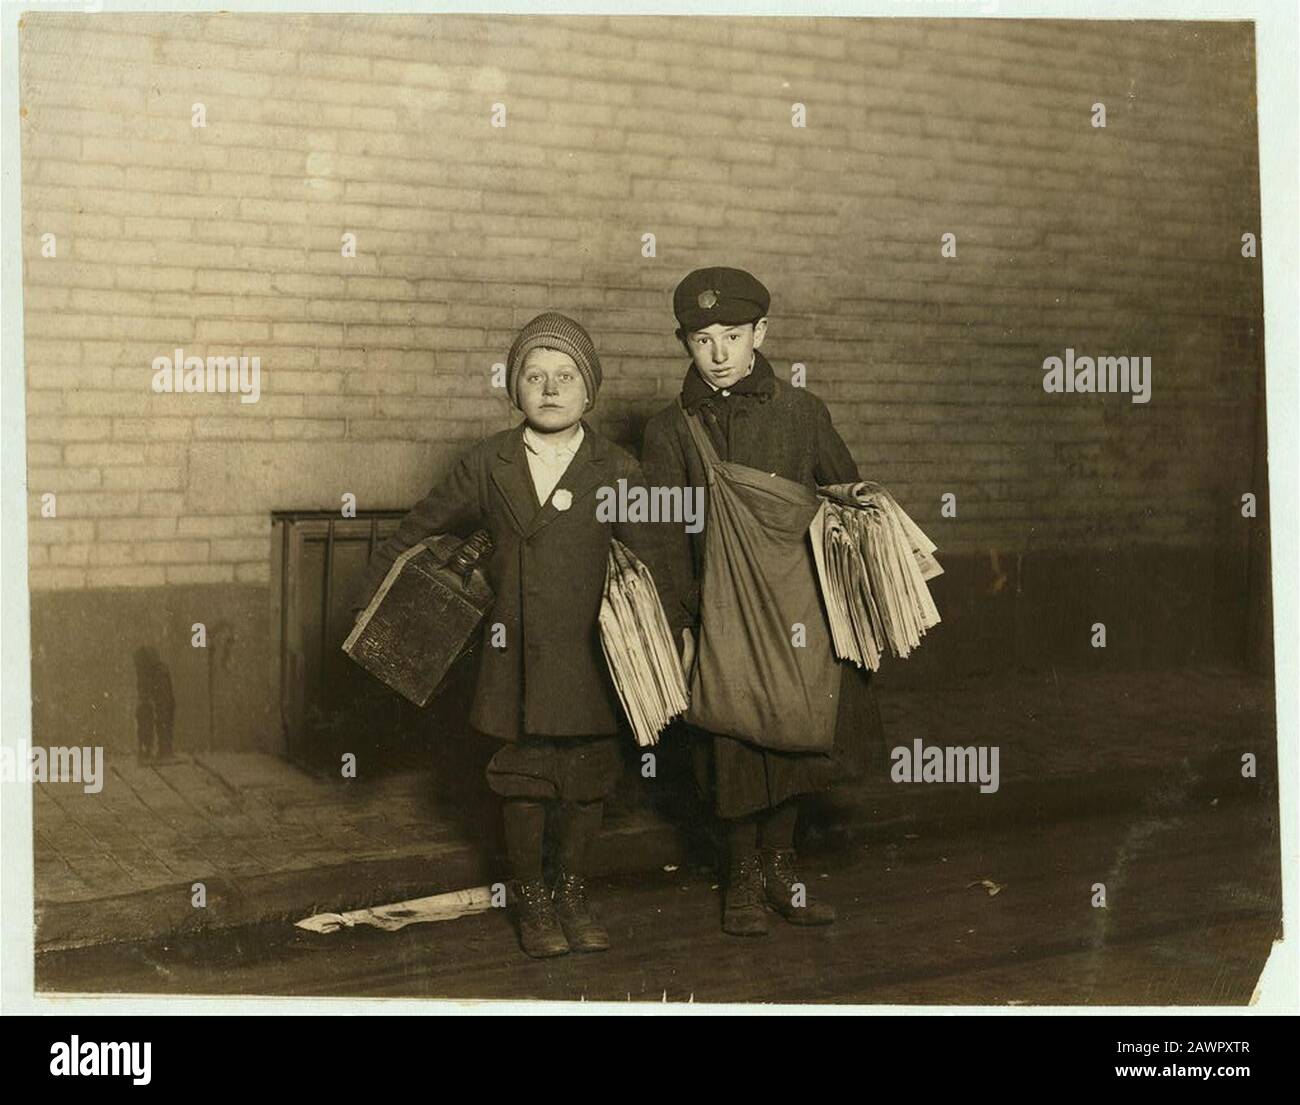 For Child Welfare Exhibit 1912-13.) 1-00 A.M. Sunday, Nov 24, 1912, and still selling. Stanley Steiner, the boot-black and newsboy, is ten years old, and sells until 1 A.M. Lives, 92 Ulmsbec Stock Photo